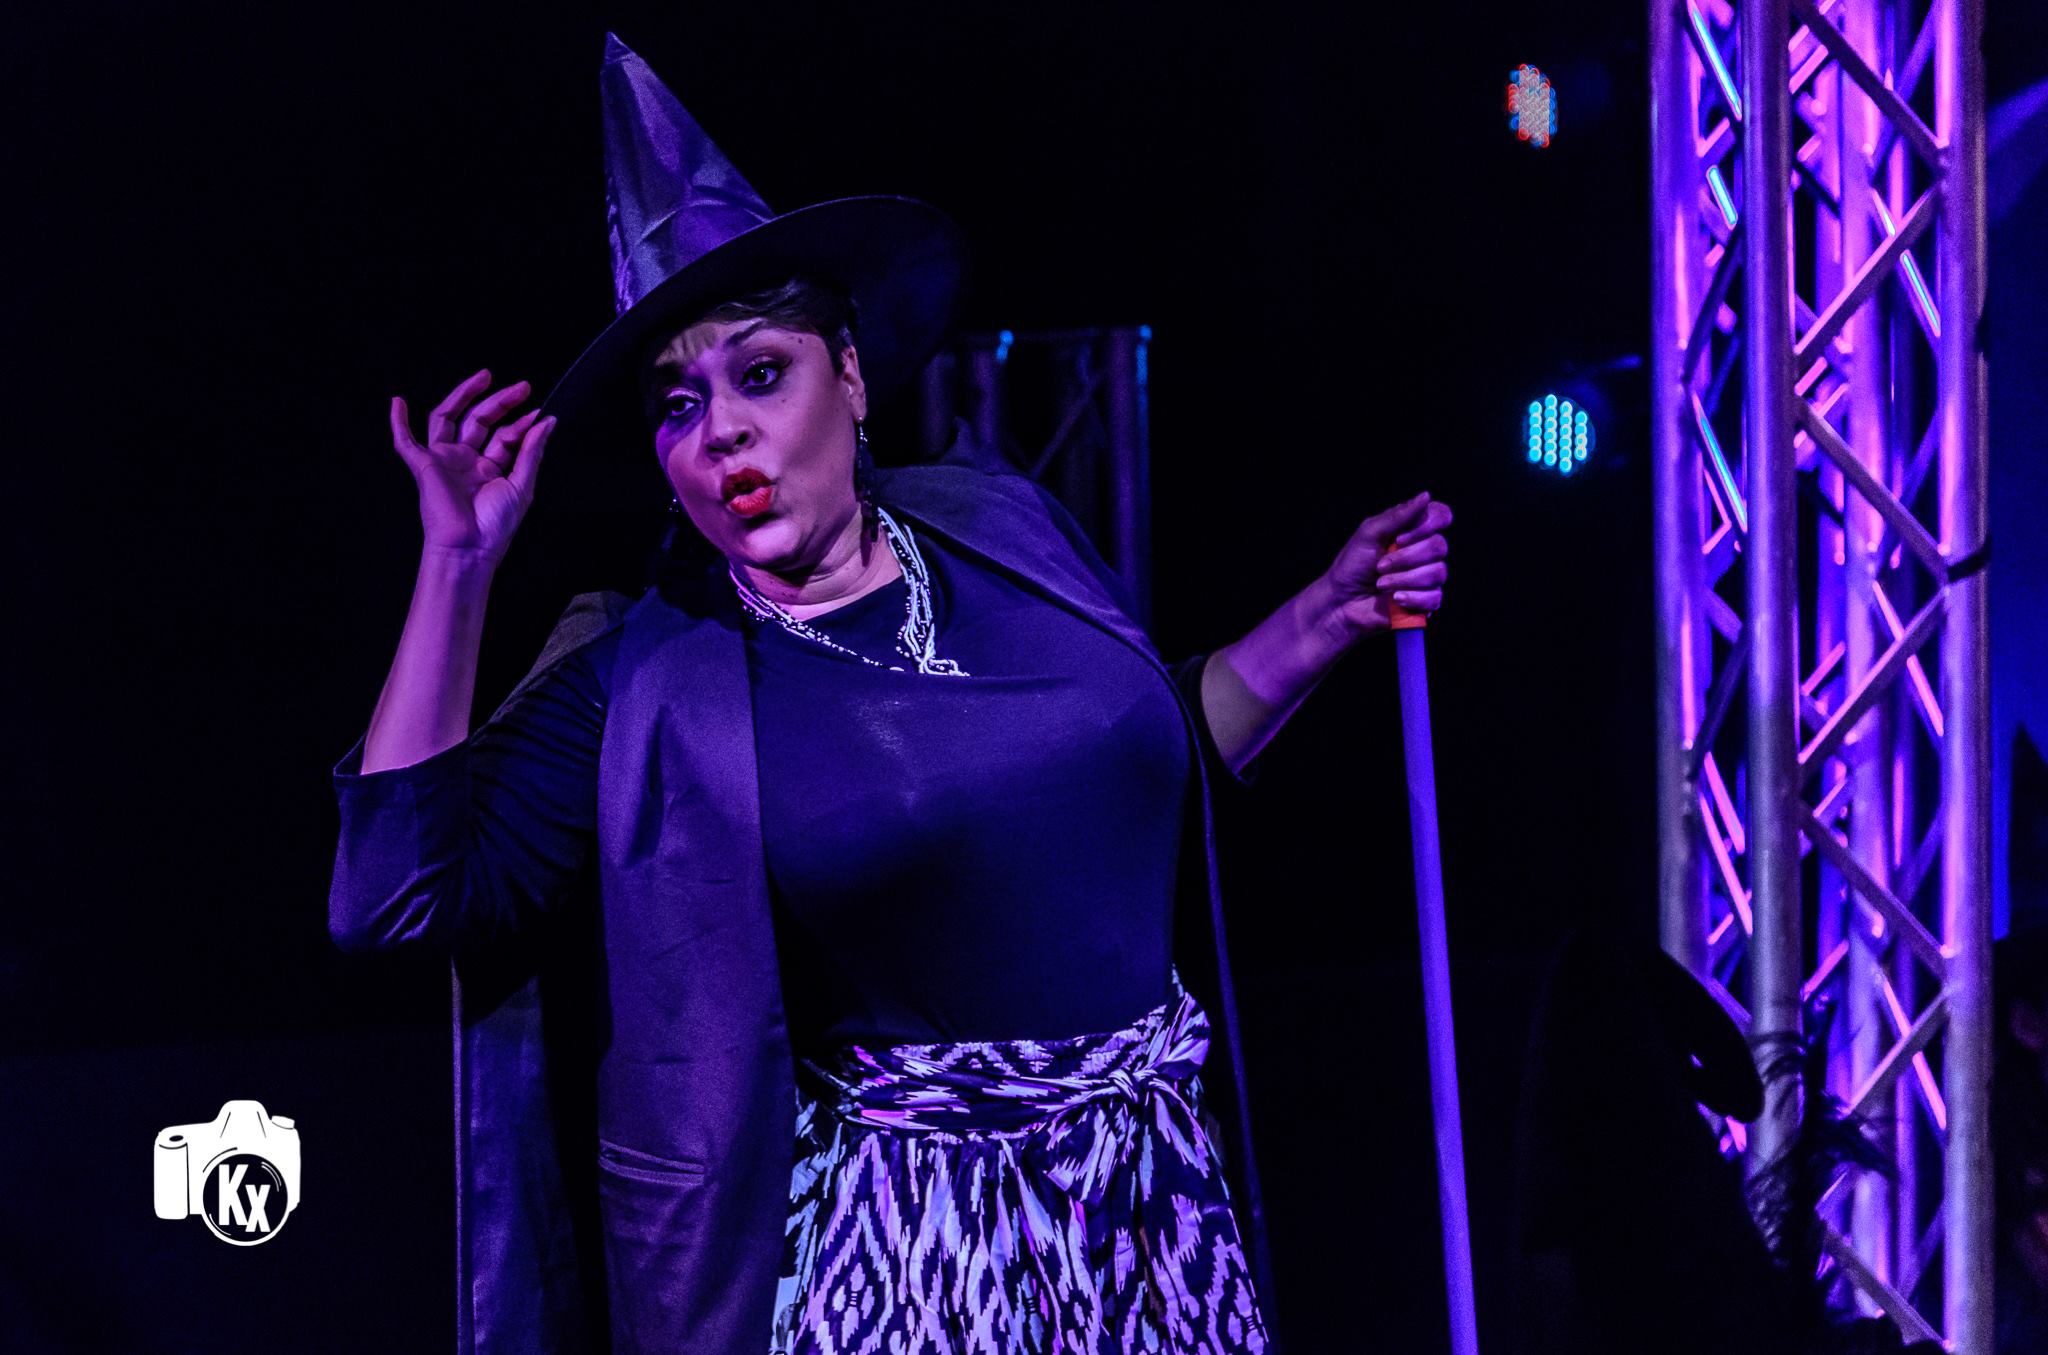 Iyona Blake as Destiny in Witch, now playing at Creative Cauldron. Photo by Kx Photography.